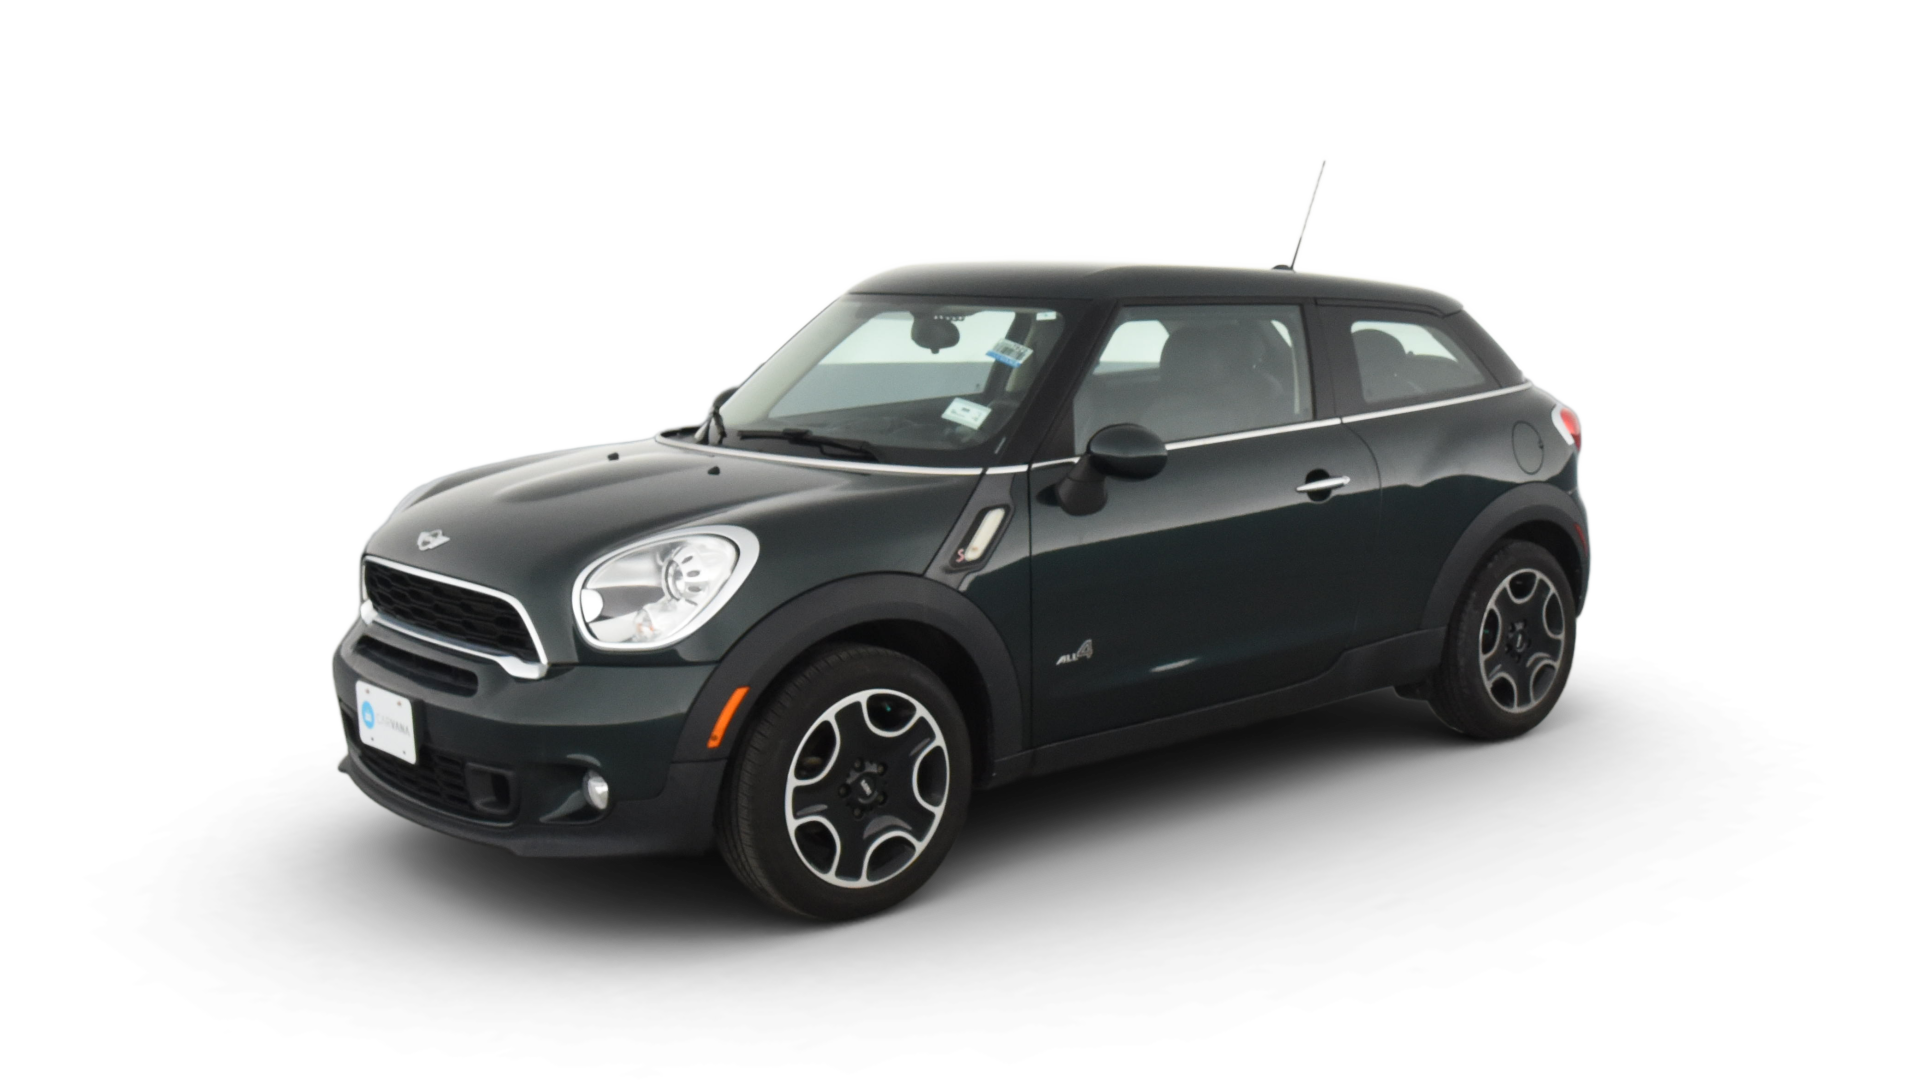 Used Gray & Green MINI Paceman with FWD For Sale Online | Carvana